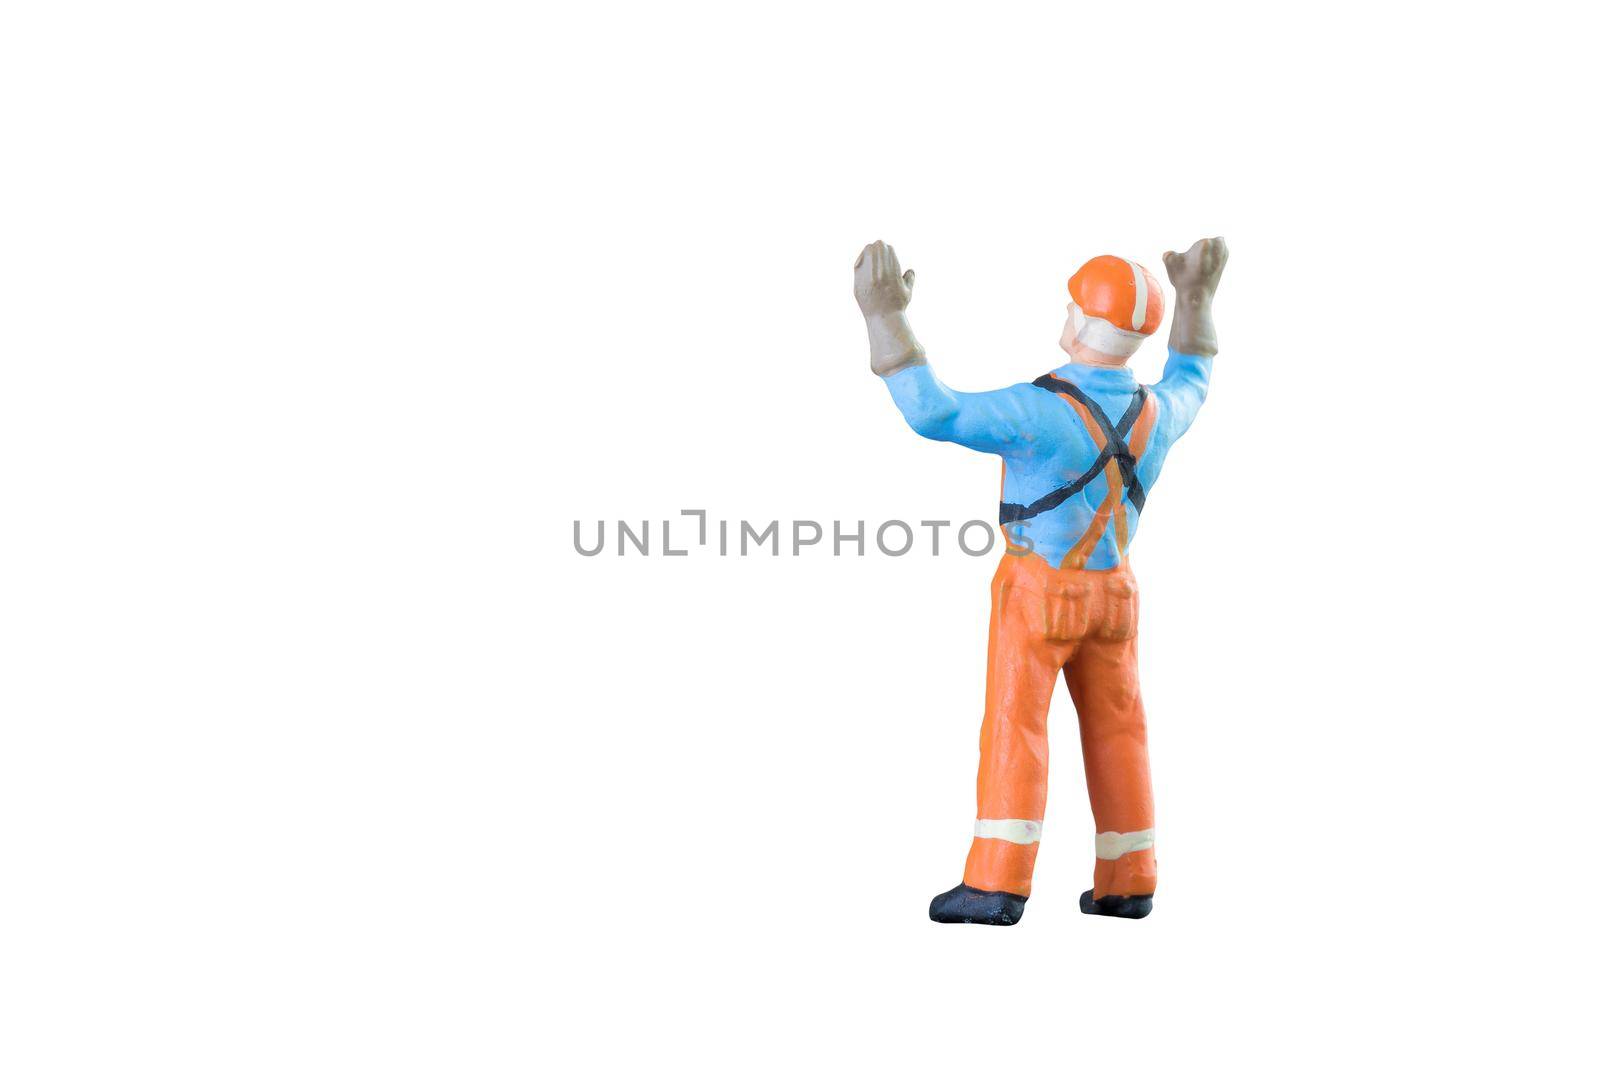 Miniature people engineer and worker occupation isolated with clipping paht on white background. Elegant Design with copy space for placement your text, mock up for industrial and construction concept by Nuamfolio